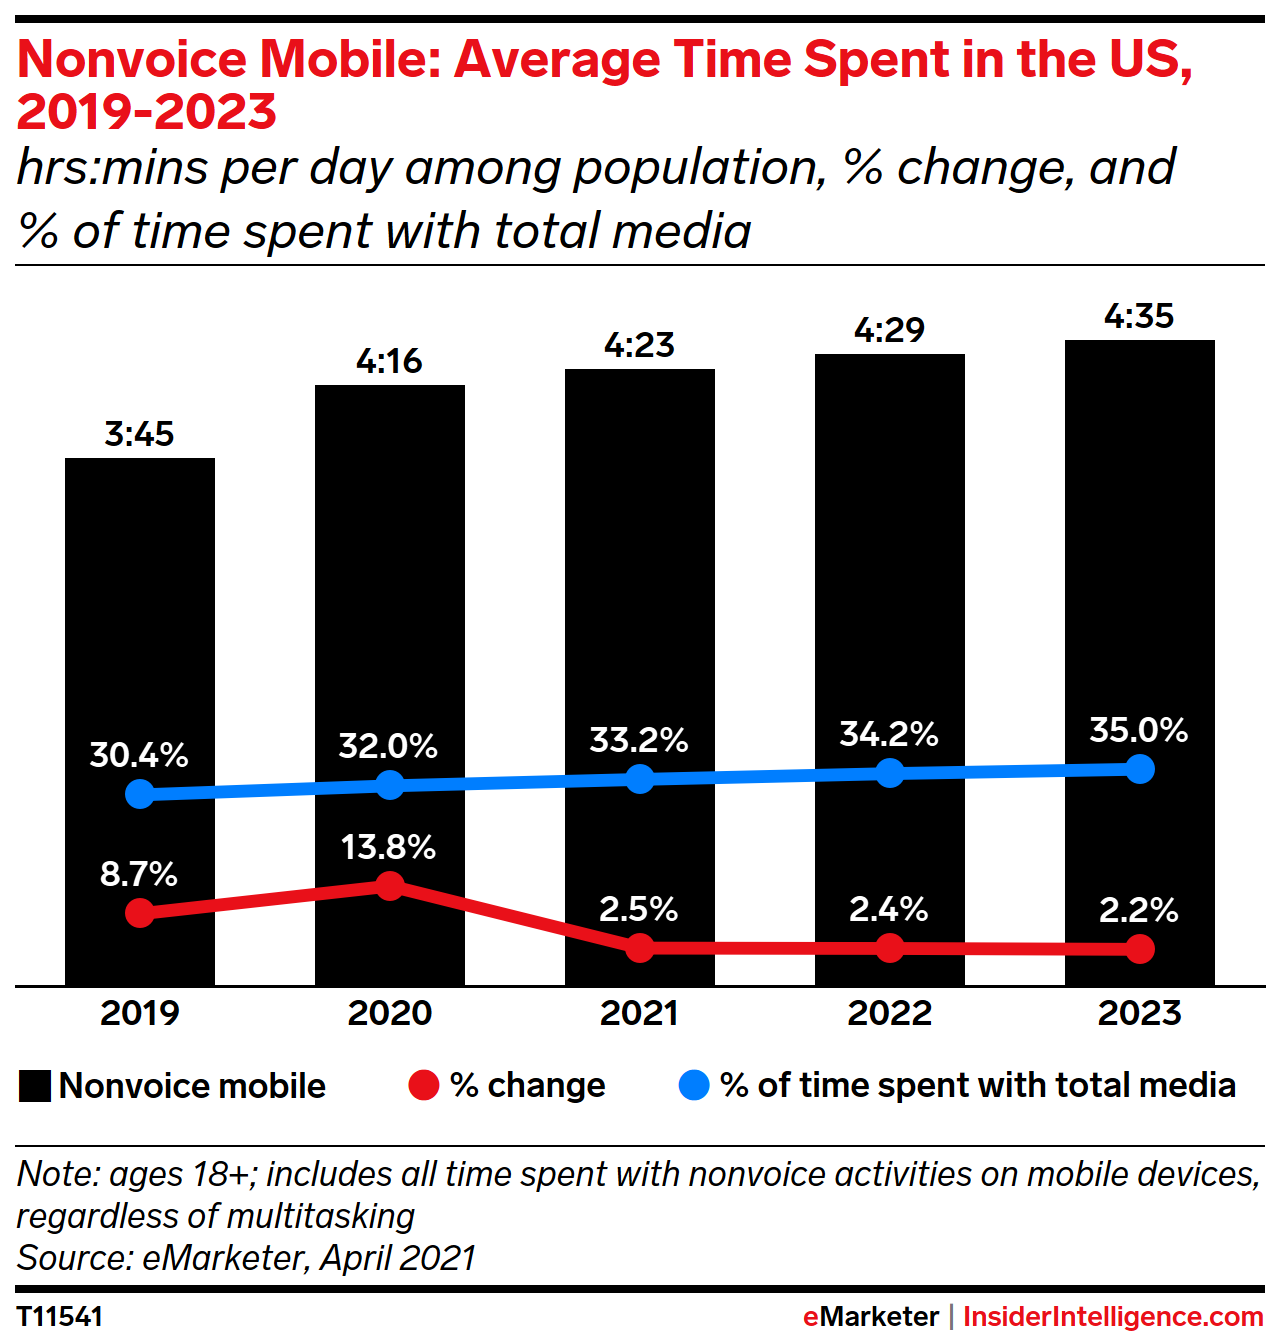 Mobile Nonvoice Activities : Average Time Spent in the US, 2019-2023 (hrs:mins per day among population, % change and % of total time spent with major media)